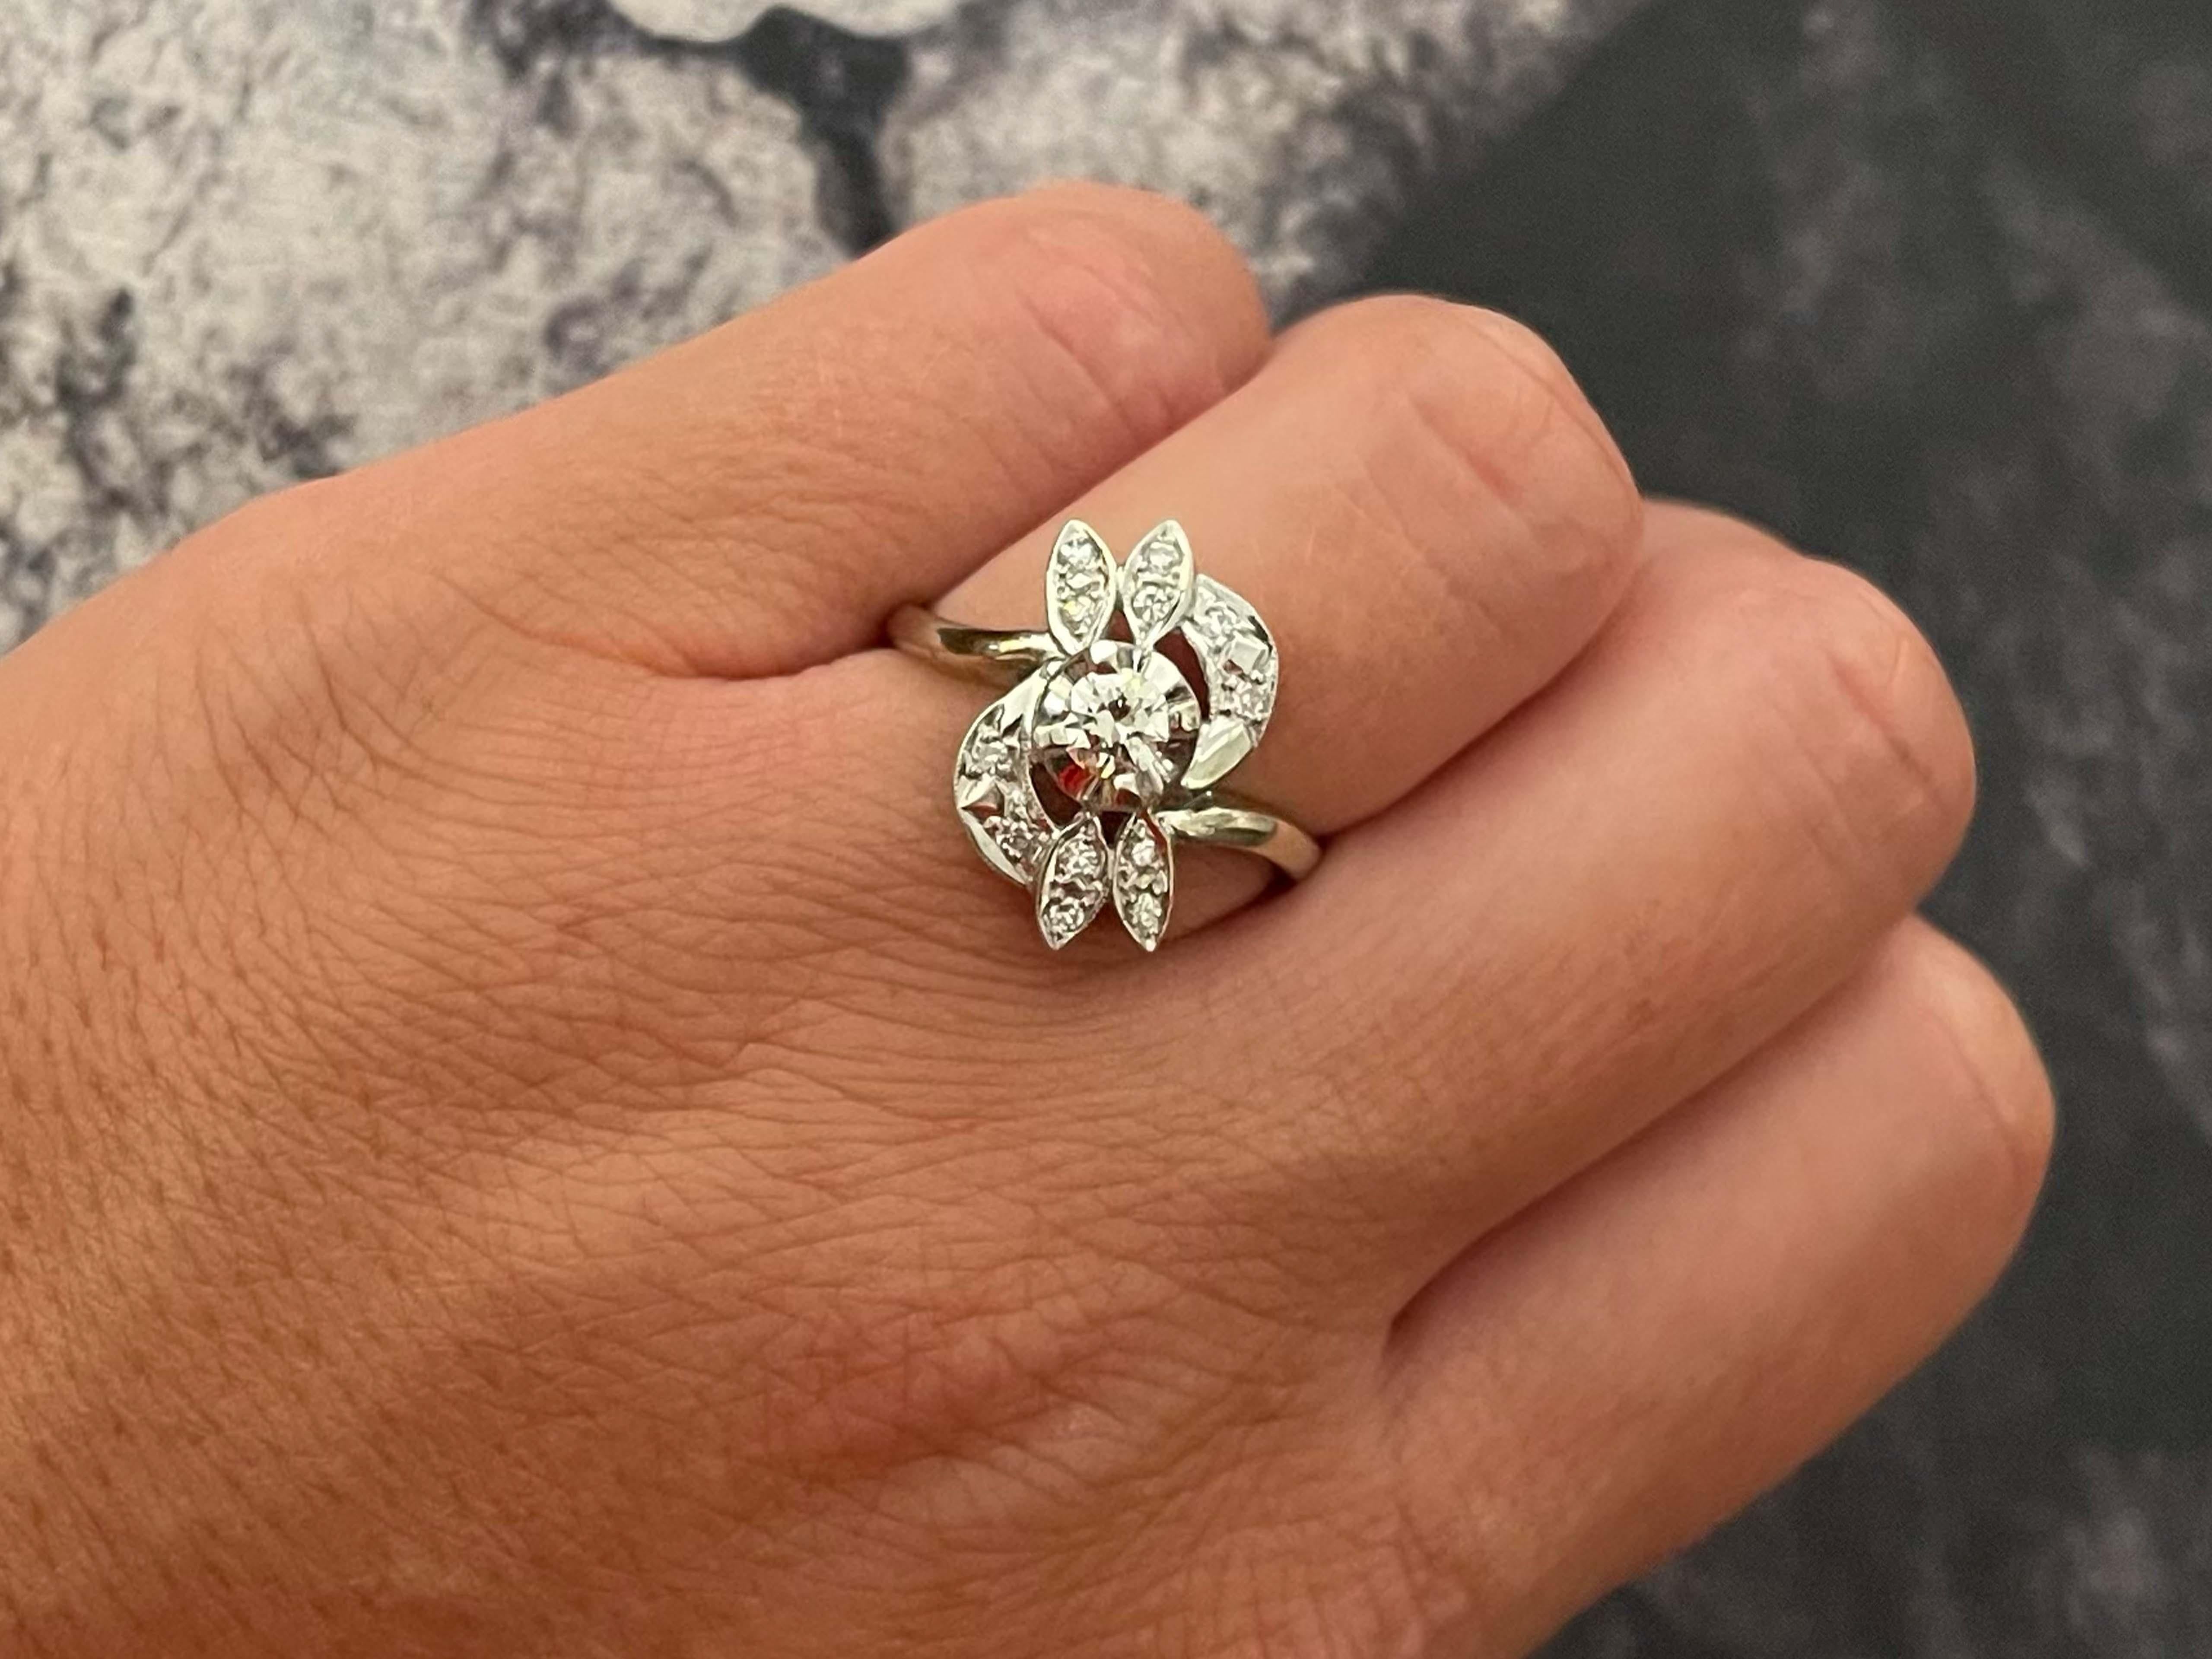 Item Specifications:

Metal: 14k White Gold

Style: Statement Ring

Ring Size: 9 (resizing available for a fee)

Total Weight: 4.4 Grams

Diamond Count: 1 transition cut and 12 single cut

Diamond Carat Weight: 0.30 + 0.06


Diamond Clarity: